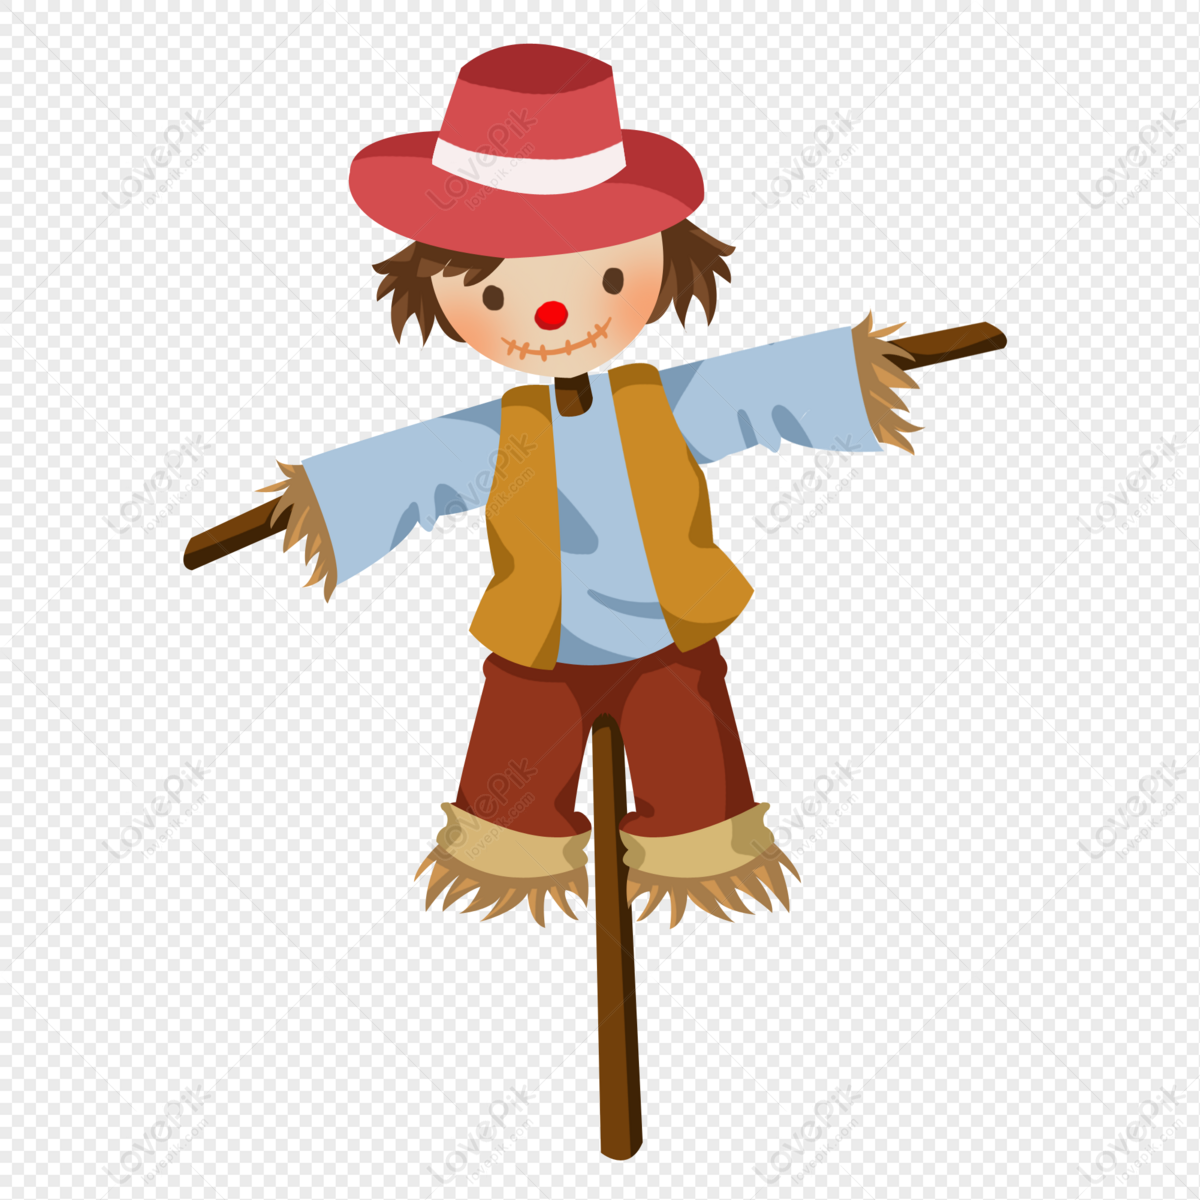 Cartoon Hand Drawn Cute Scarecrow Free PNG And Clipart Image For Free  Download - Lovepik | 401358059